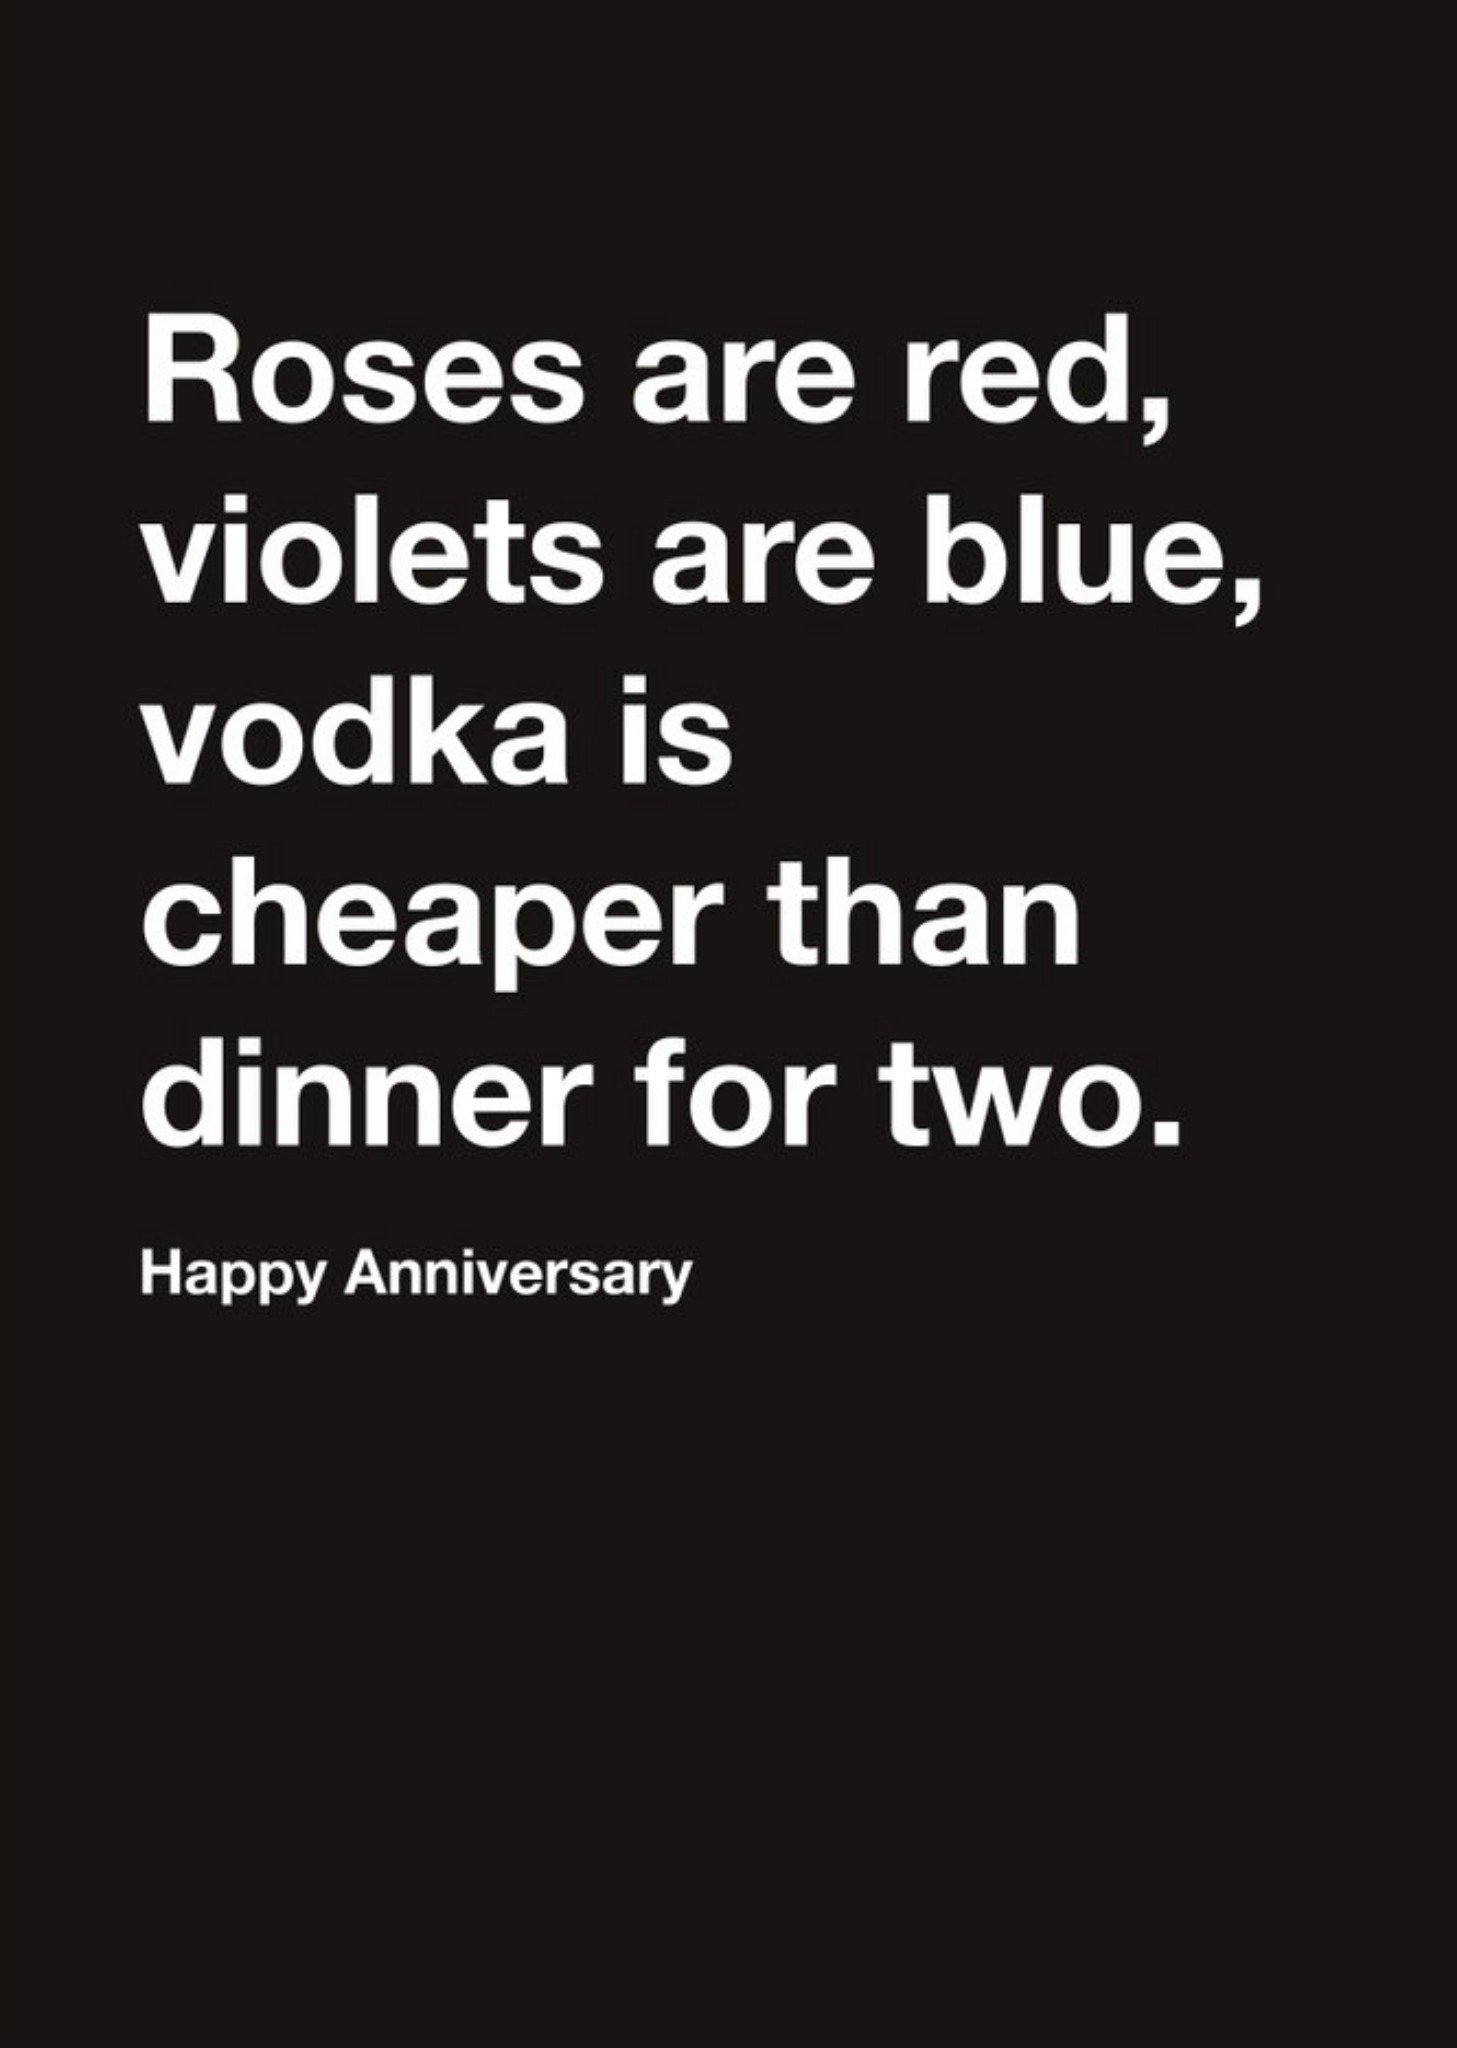 Moonpig Carte Blanche Roses Are Red, Vodka Is Cheaper Than Dinner For Two Happy Anniversary Card Eca